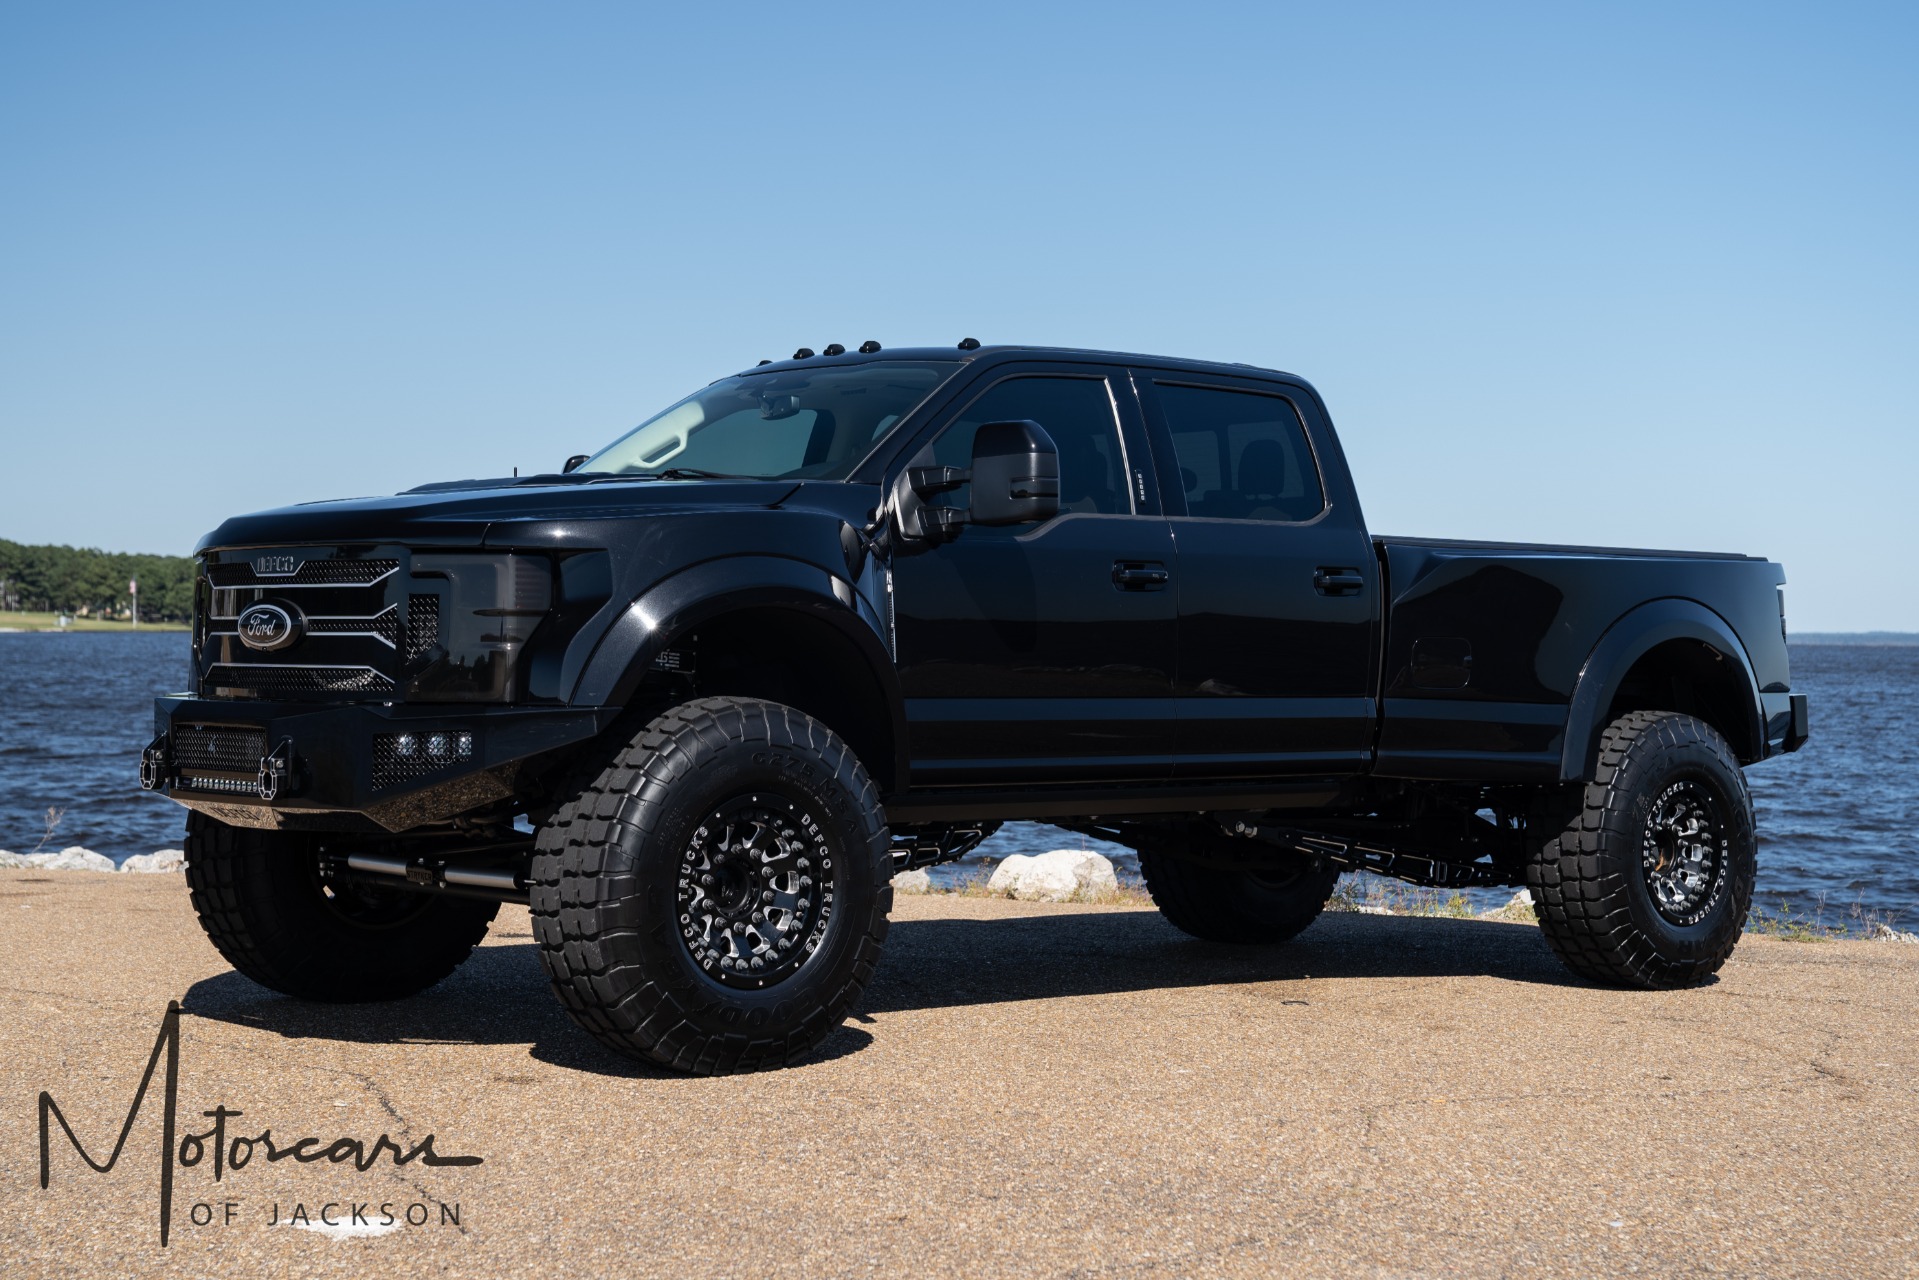 Used-2021-Ford-Super-Duty-F-450-DEFCO-BA450-Limited-for-sale-Jackson-MS